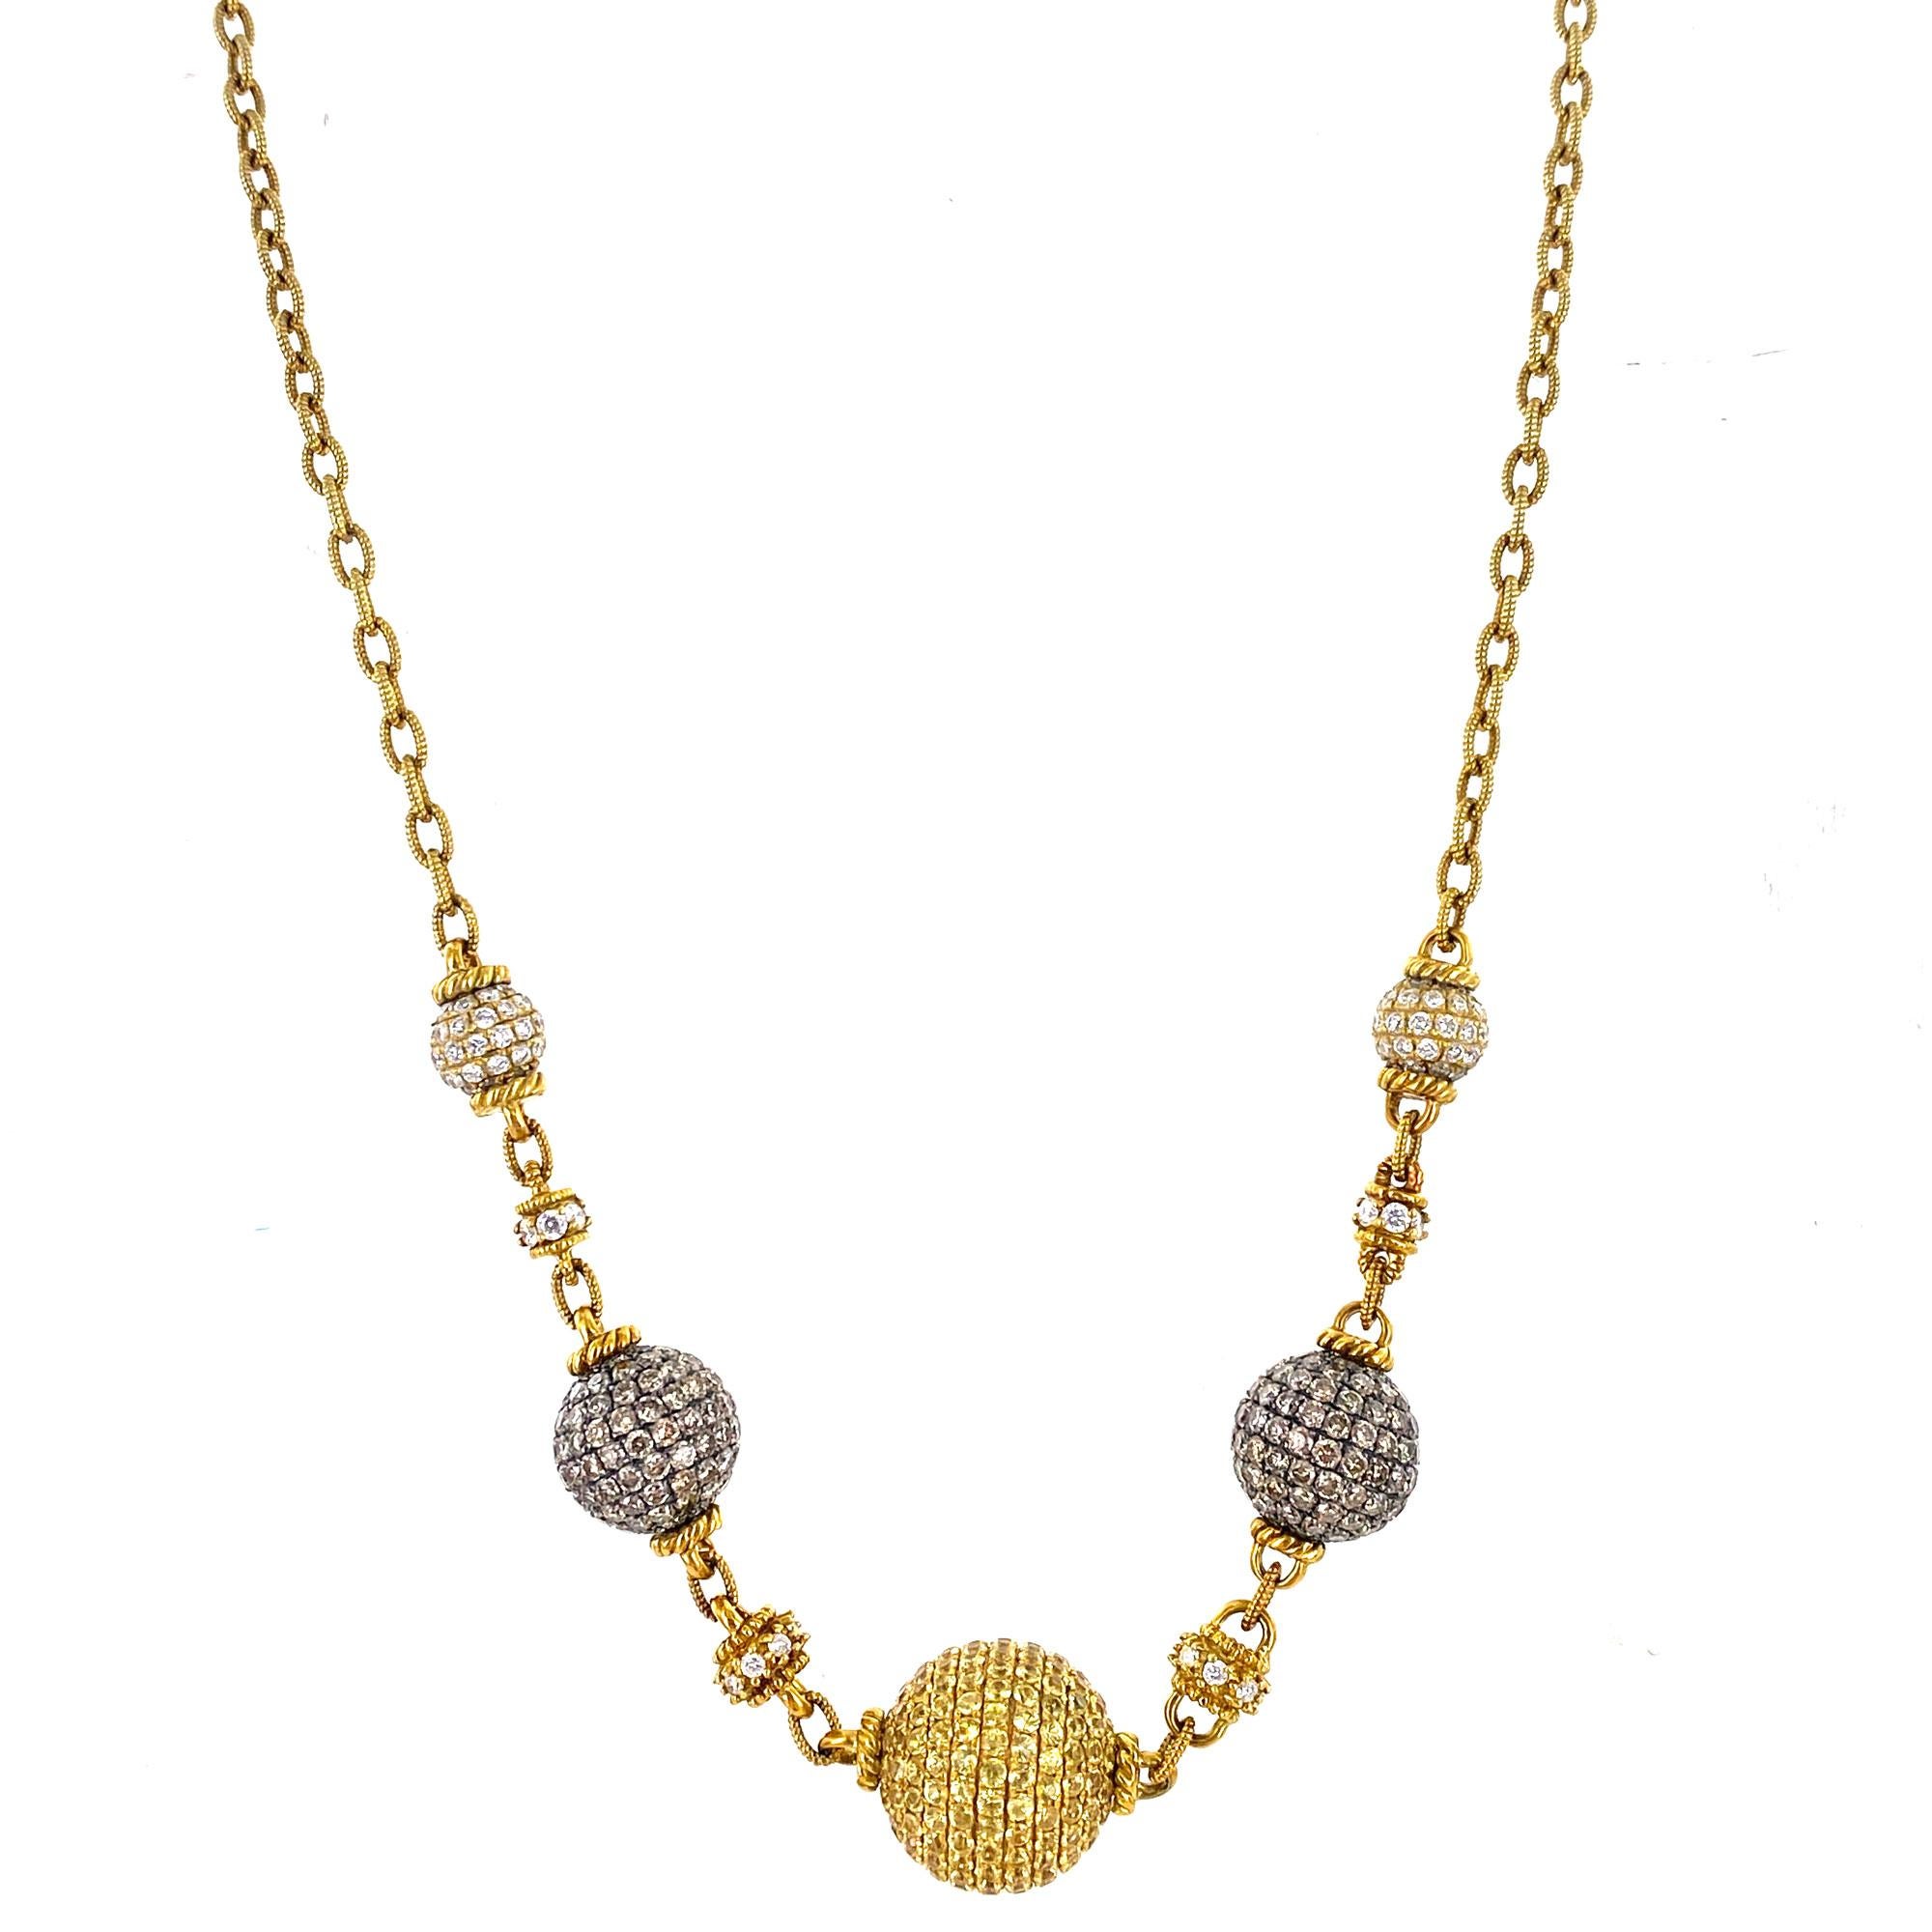 Fabulous diamond and sapphire ball necklace by Judith Ripka. The necklace is crafted in all 18 karat yellow gold and measures 17 inches in length. The white diamond and champaign diamond balls feature 5.50 carat total weight diamonds. In the center